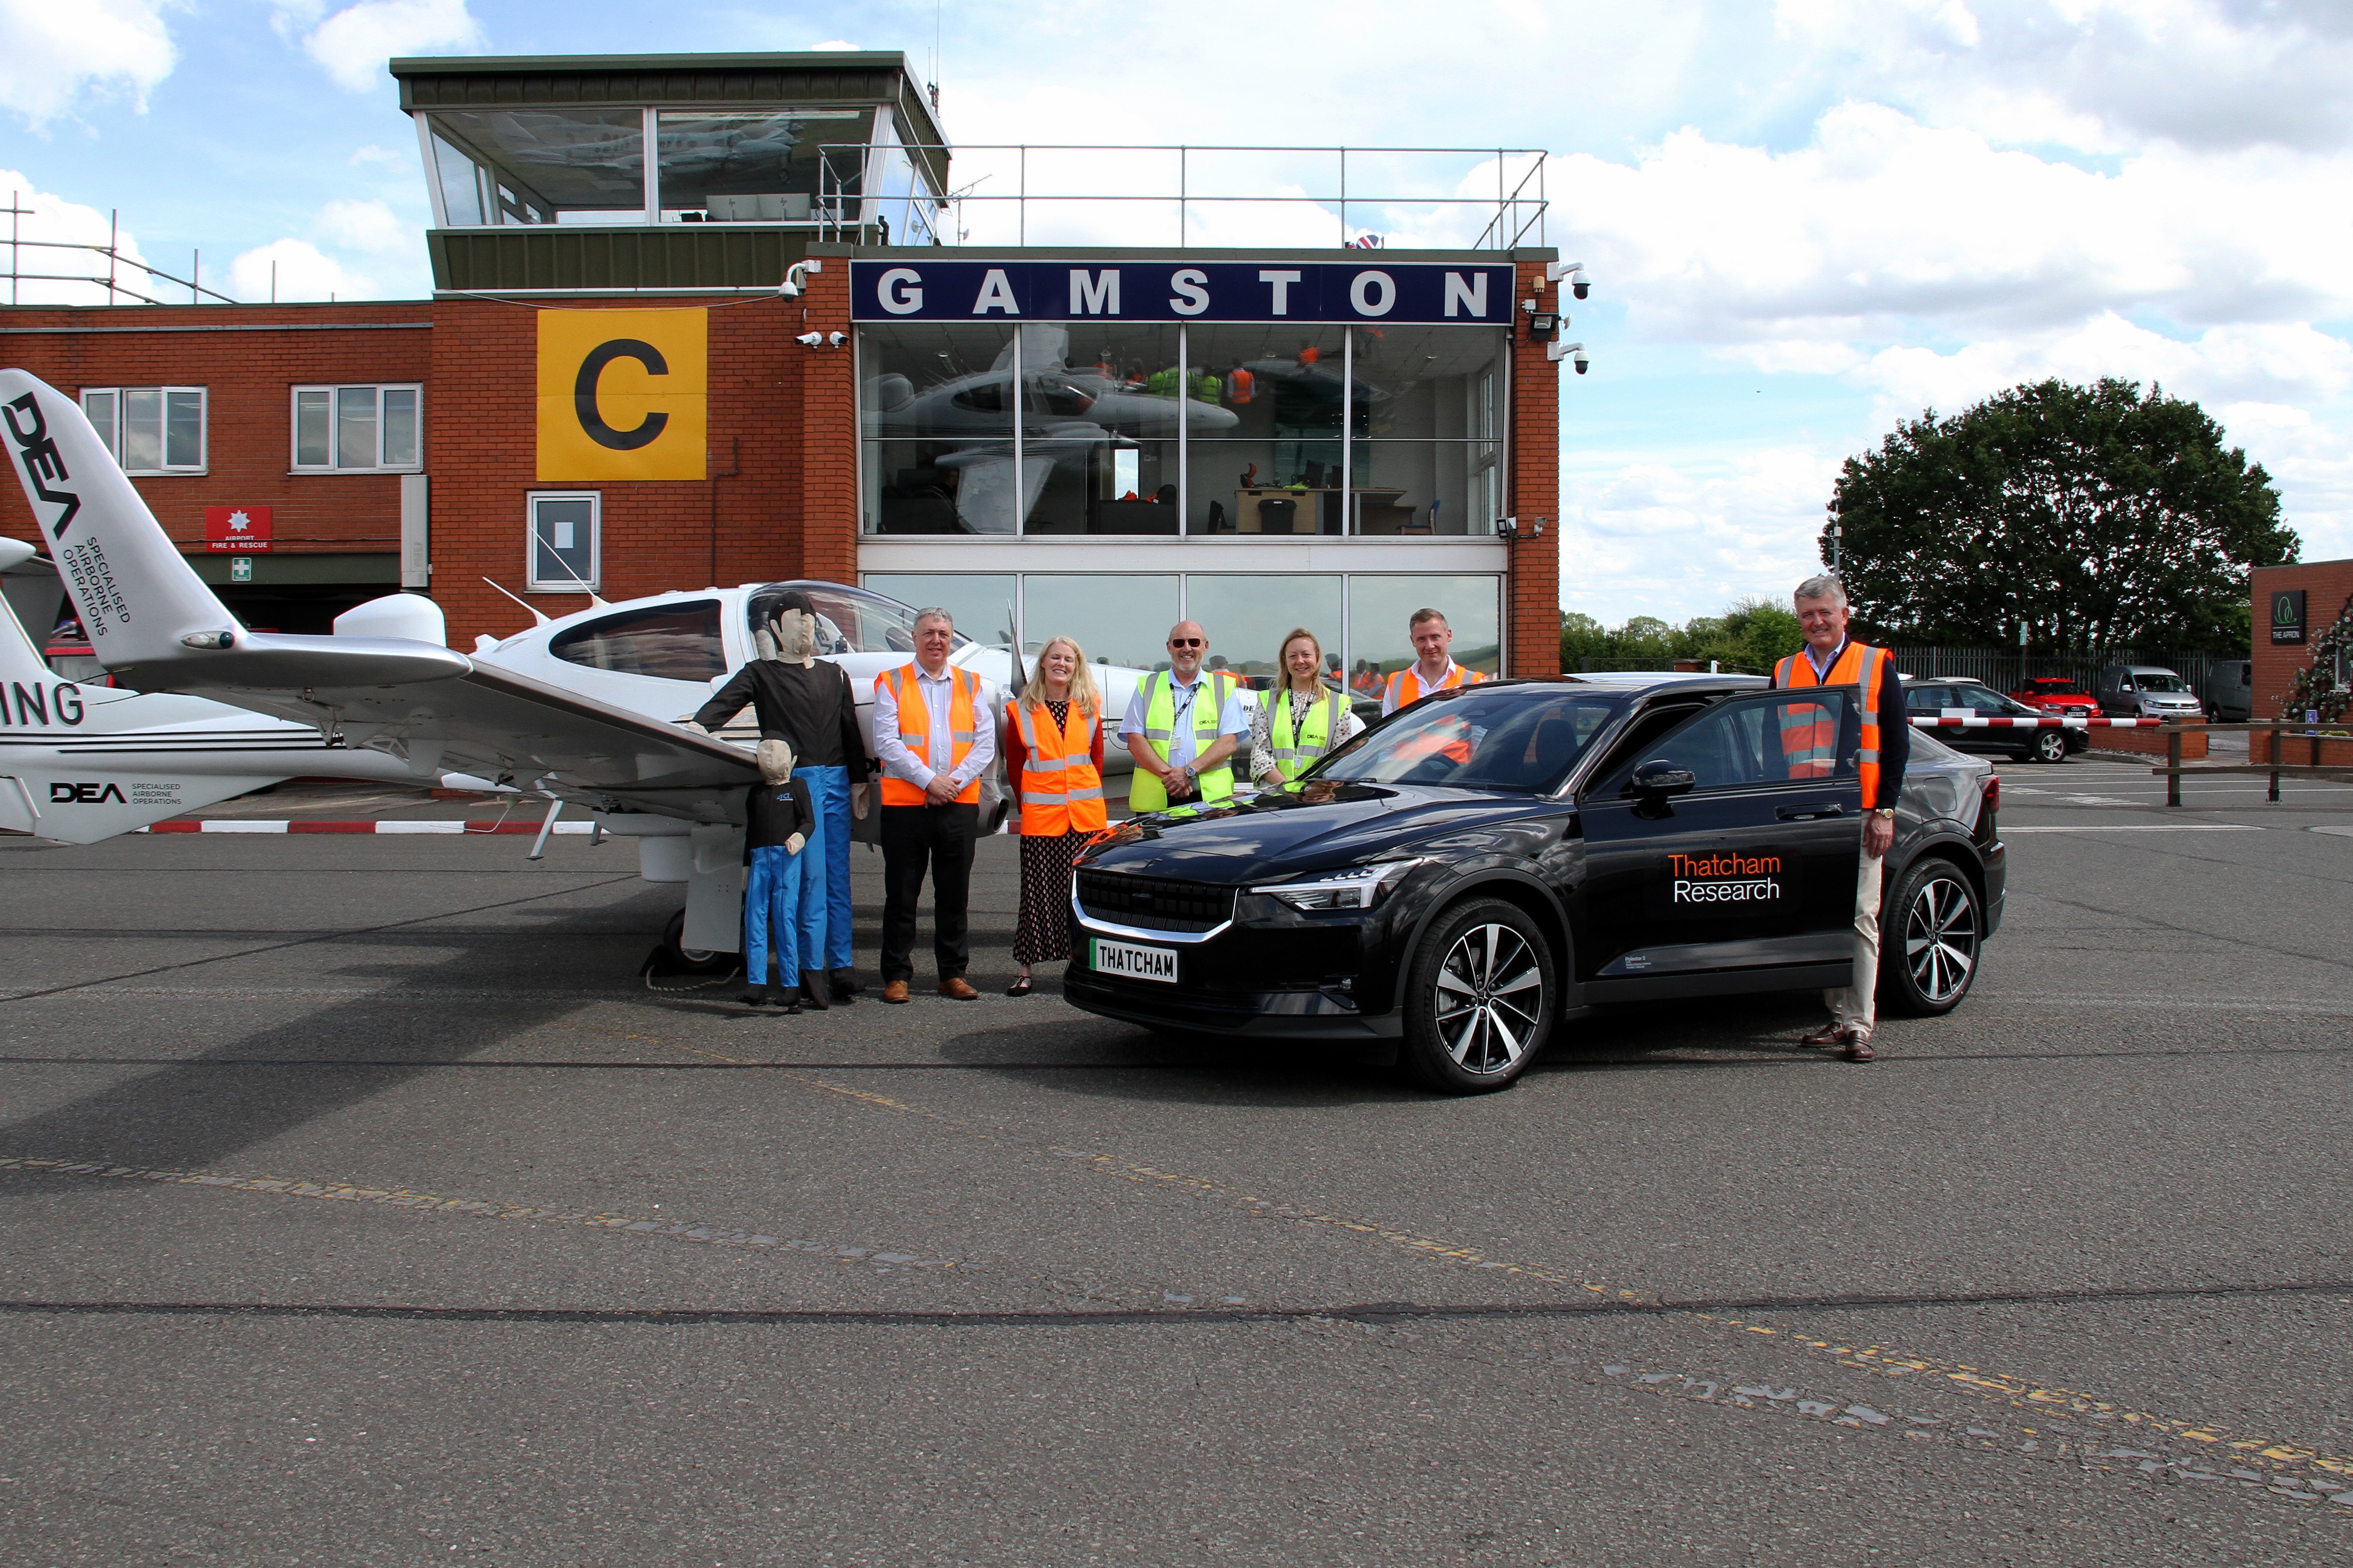 Investment and development signals new era at Gamston airport